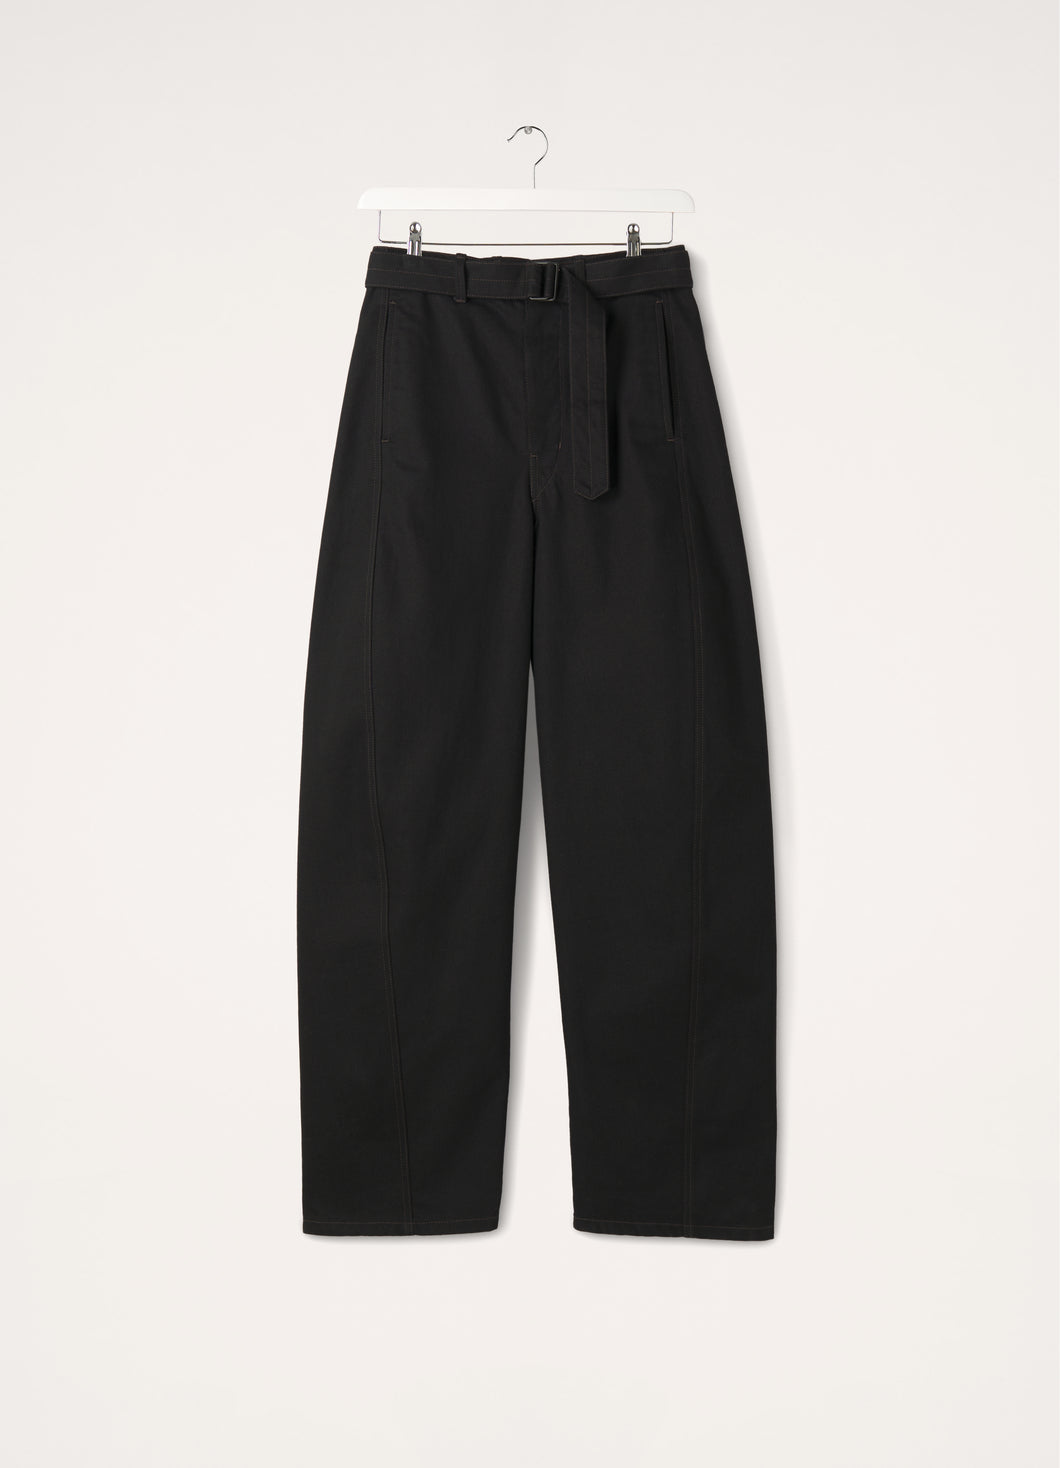 Lemaire Twisted Belted Pants (Heavy Black Denim)